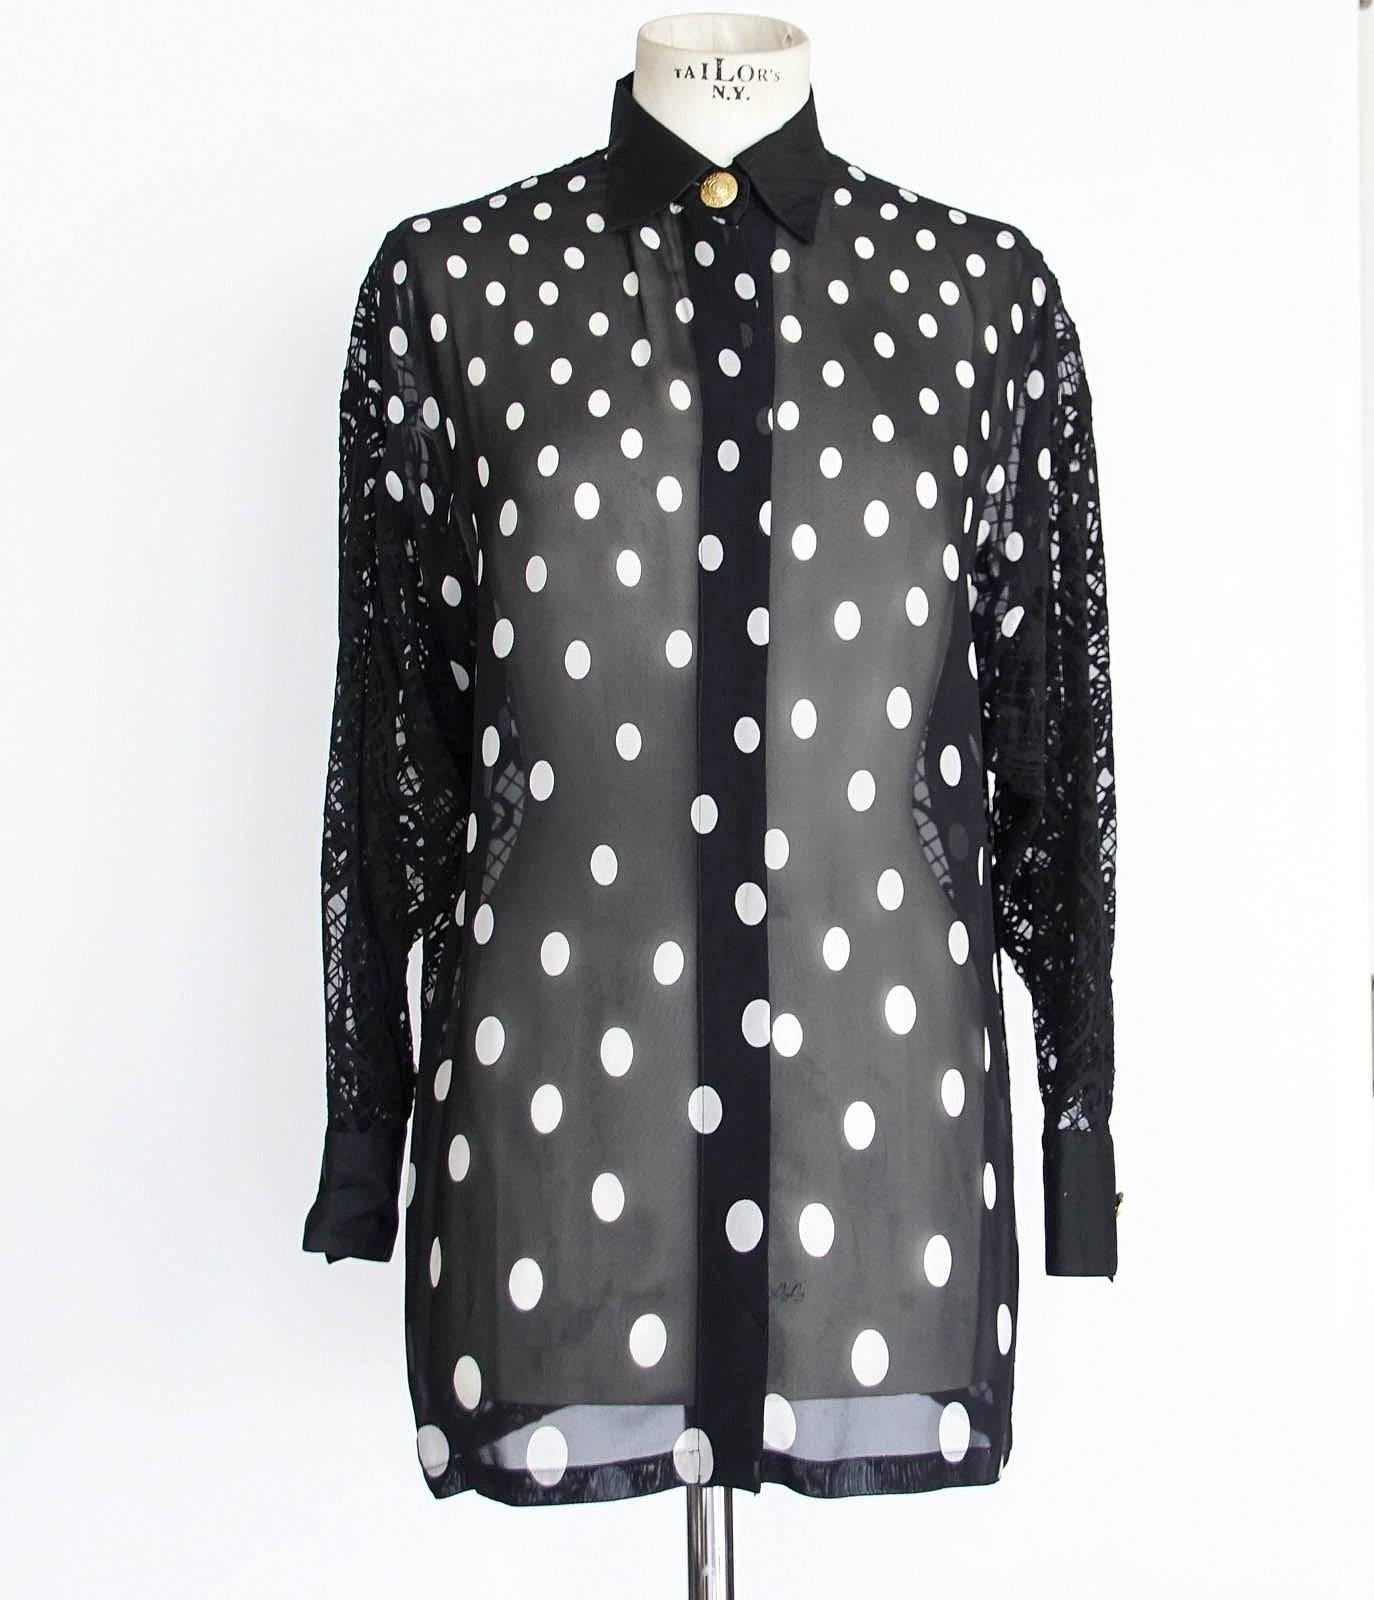 Women's Gianni Versace Couture Top Black and White Polka Dot Lace Back  38 / 4